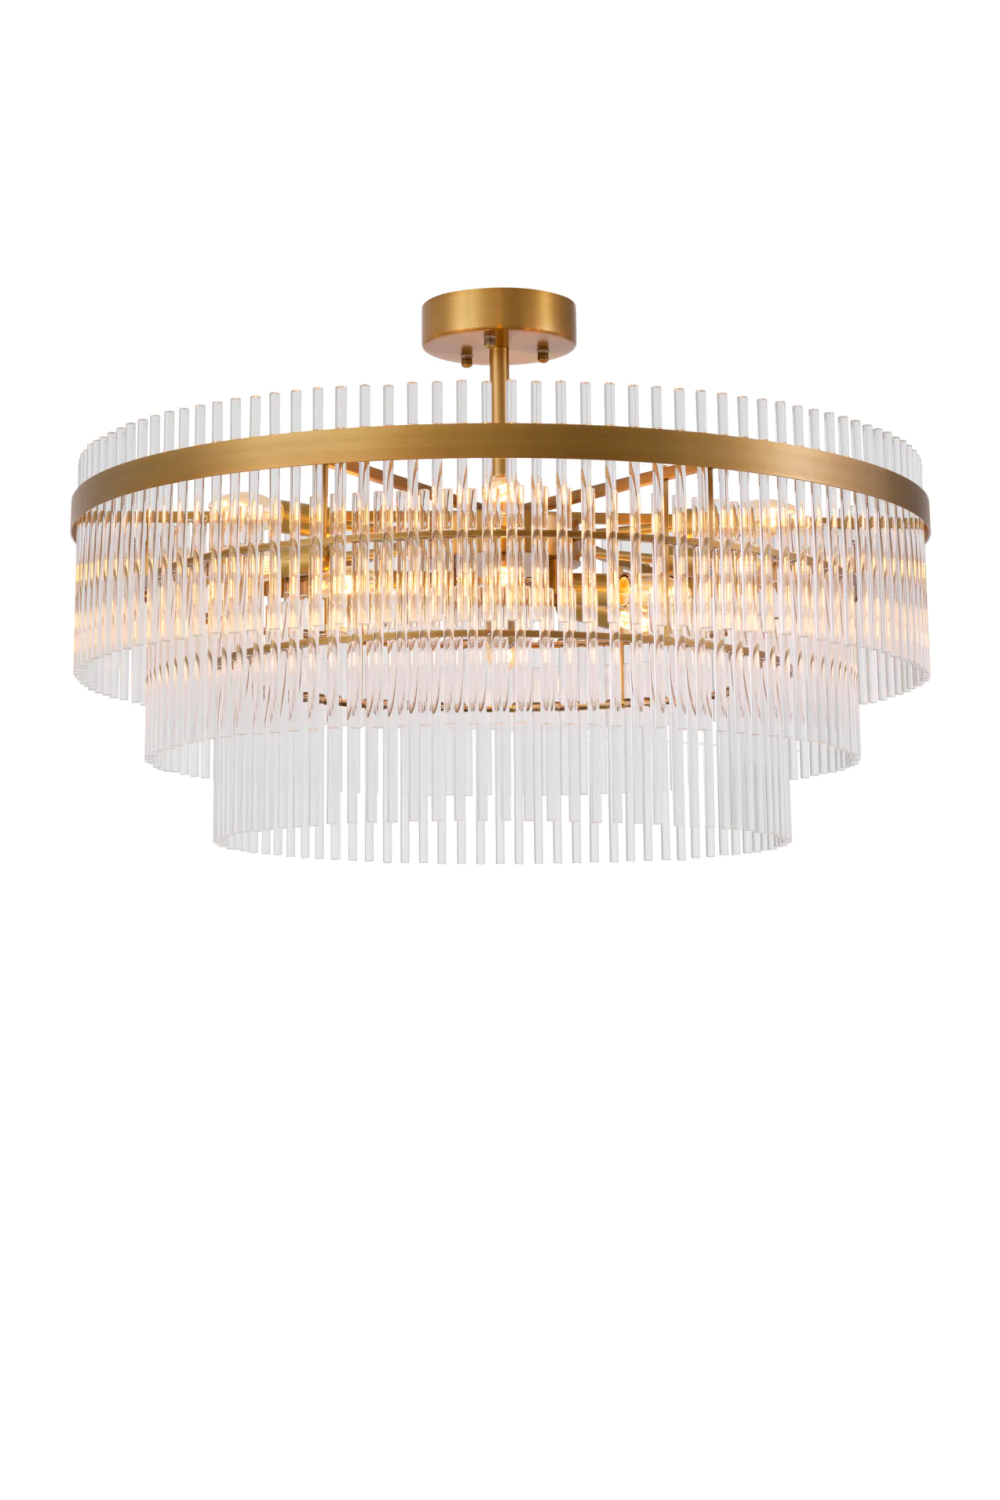 Glass Rods Tiered Ceiling Lamp | Eichholtz East | Oroa.com